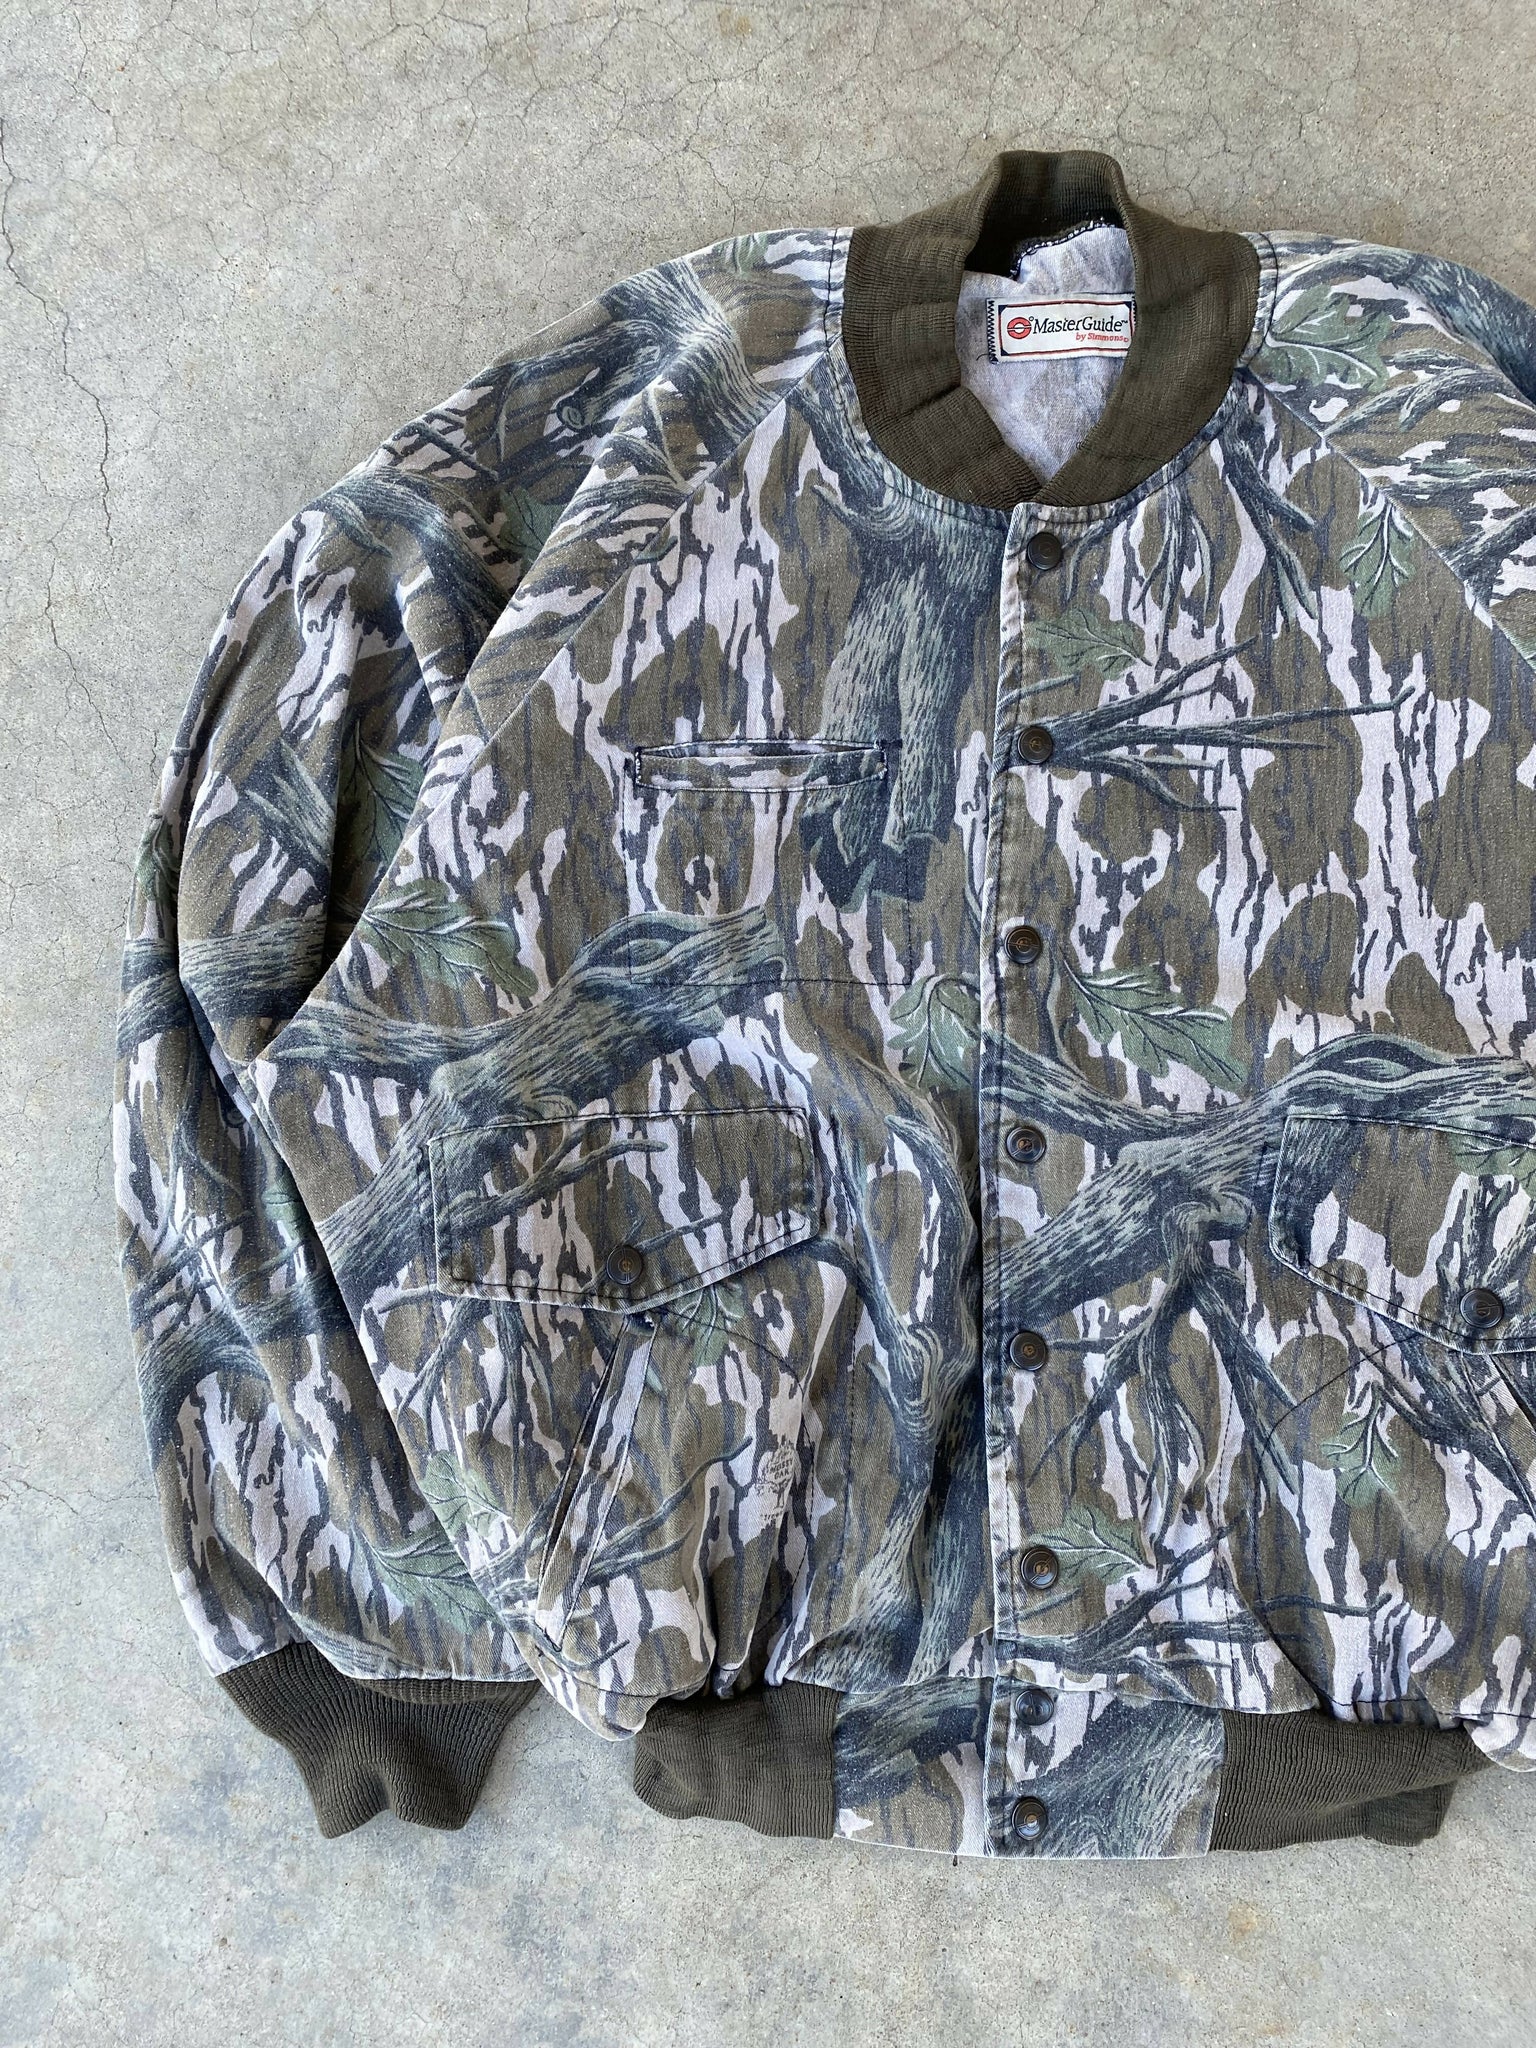 Vintage Masterguide by Simmons Treestand Camo Bomber Jacket (L/XL) 🇺🇸